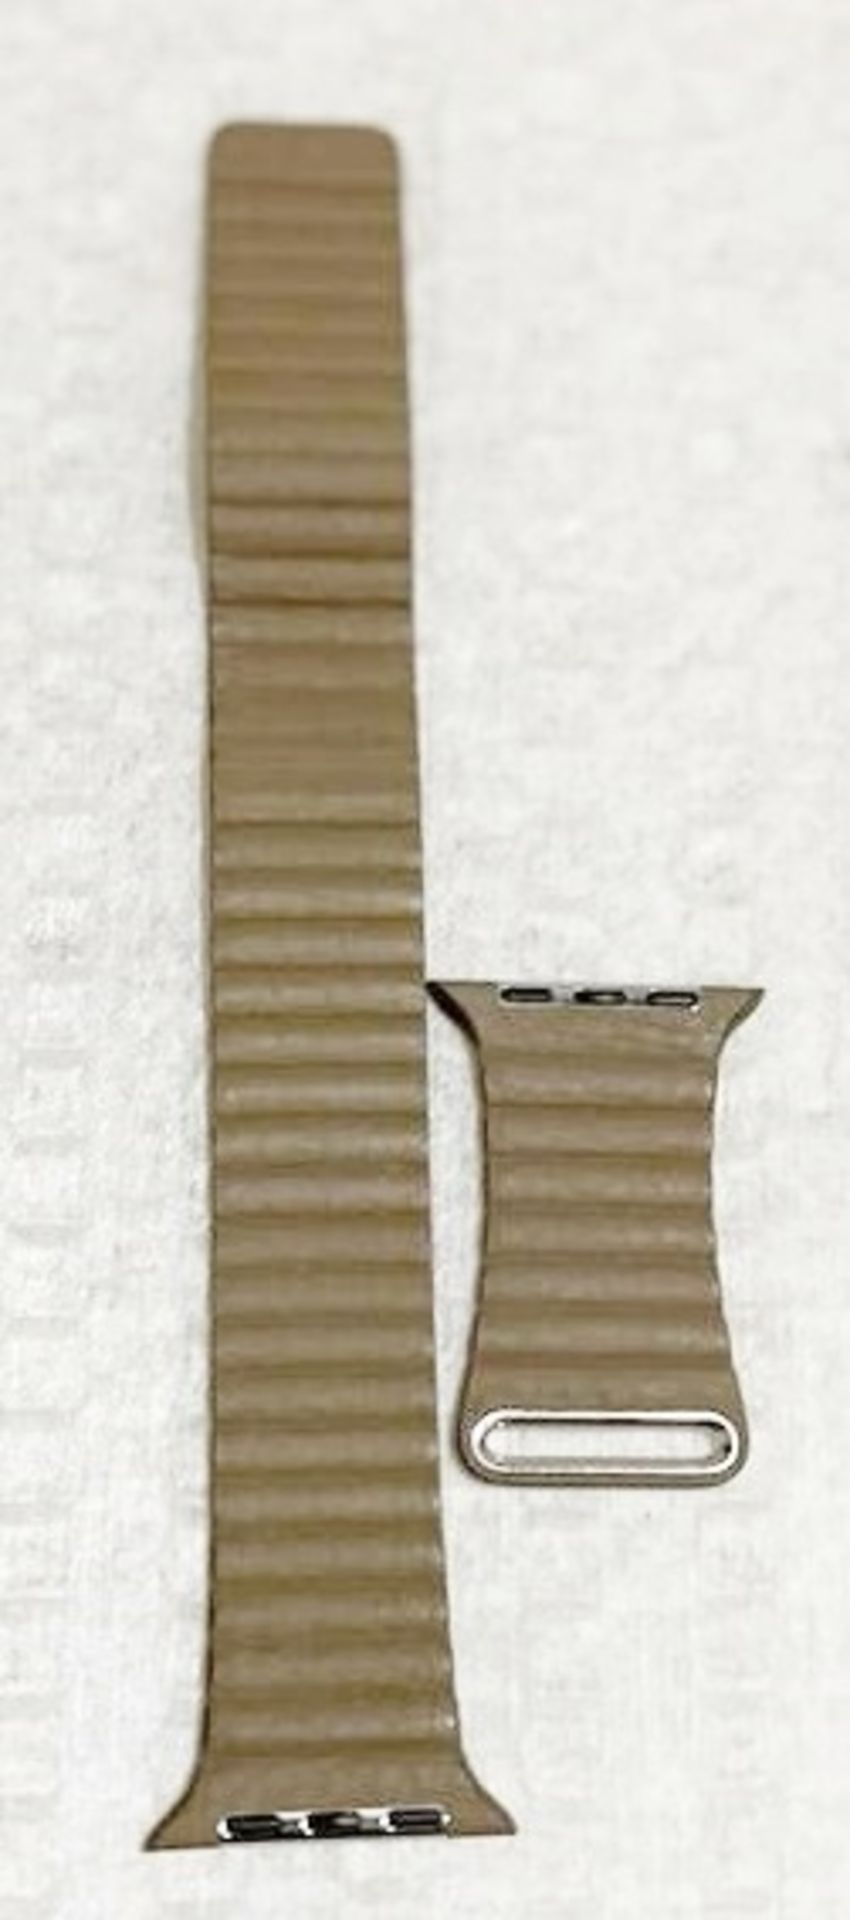 1 x APPLE WATCH Natural Leather 42mm Watch Strap - No VAT on the Hammer - CL712 - Ref: MPC852  -